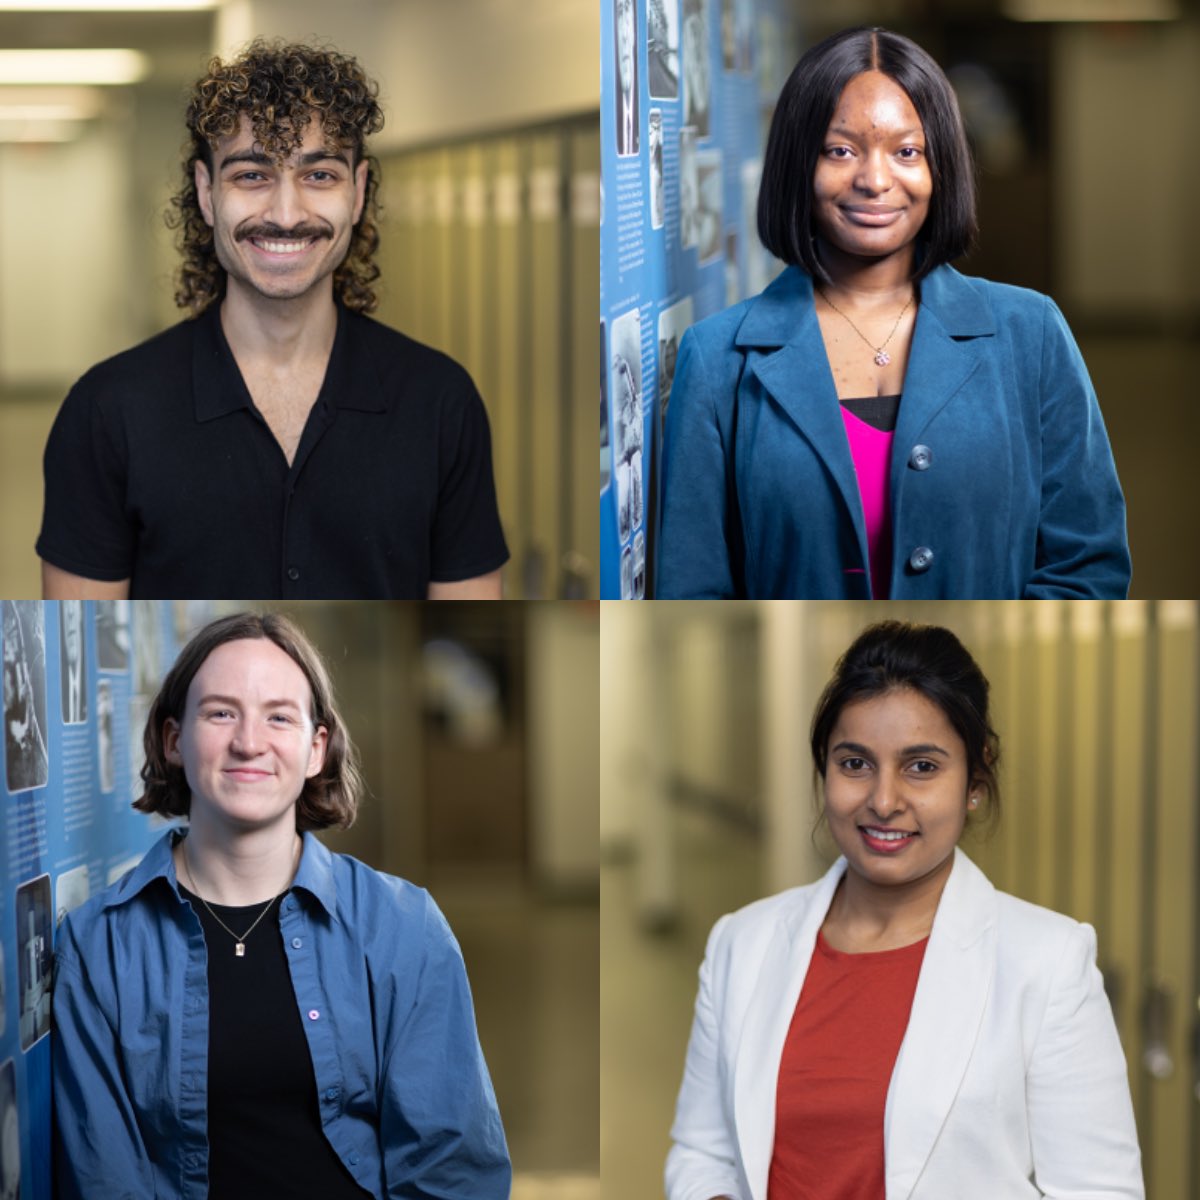 After three competitive heats, meet the twelve 3MT finalists! They will each have three short minutes to explain their research. Mark your calendars for the thrilling 3MT Final Competition on April 10. Get all the details by visiting umanitoba.ca/graduate-studi… #UManitoba…